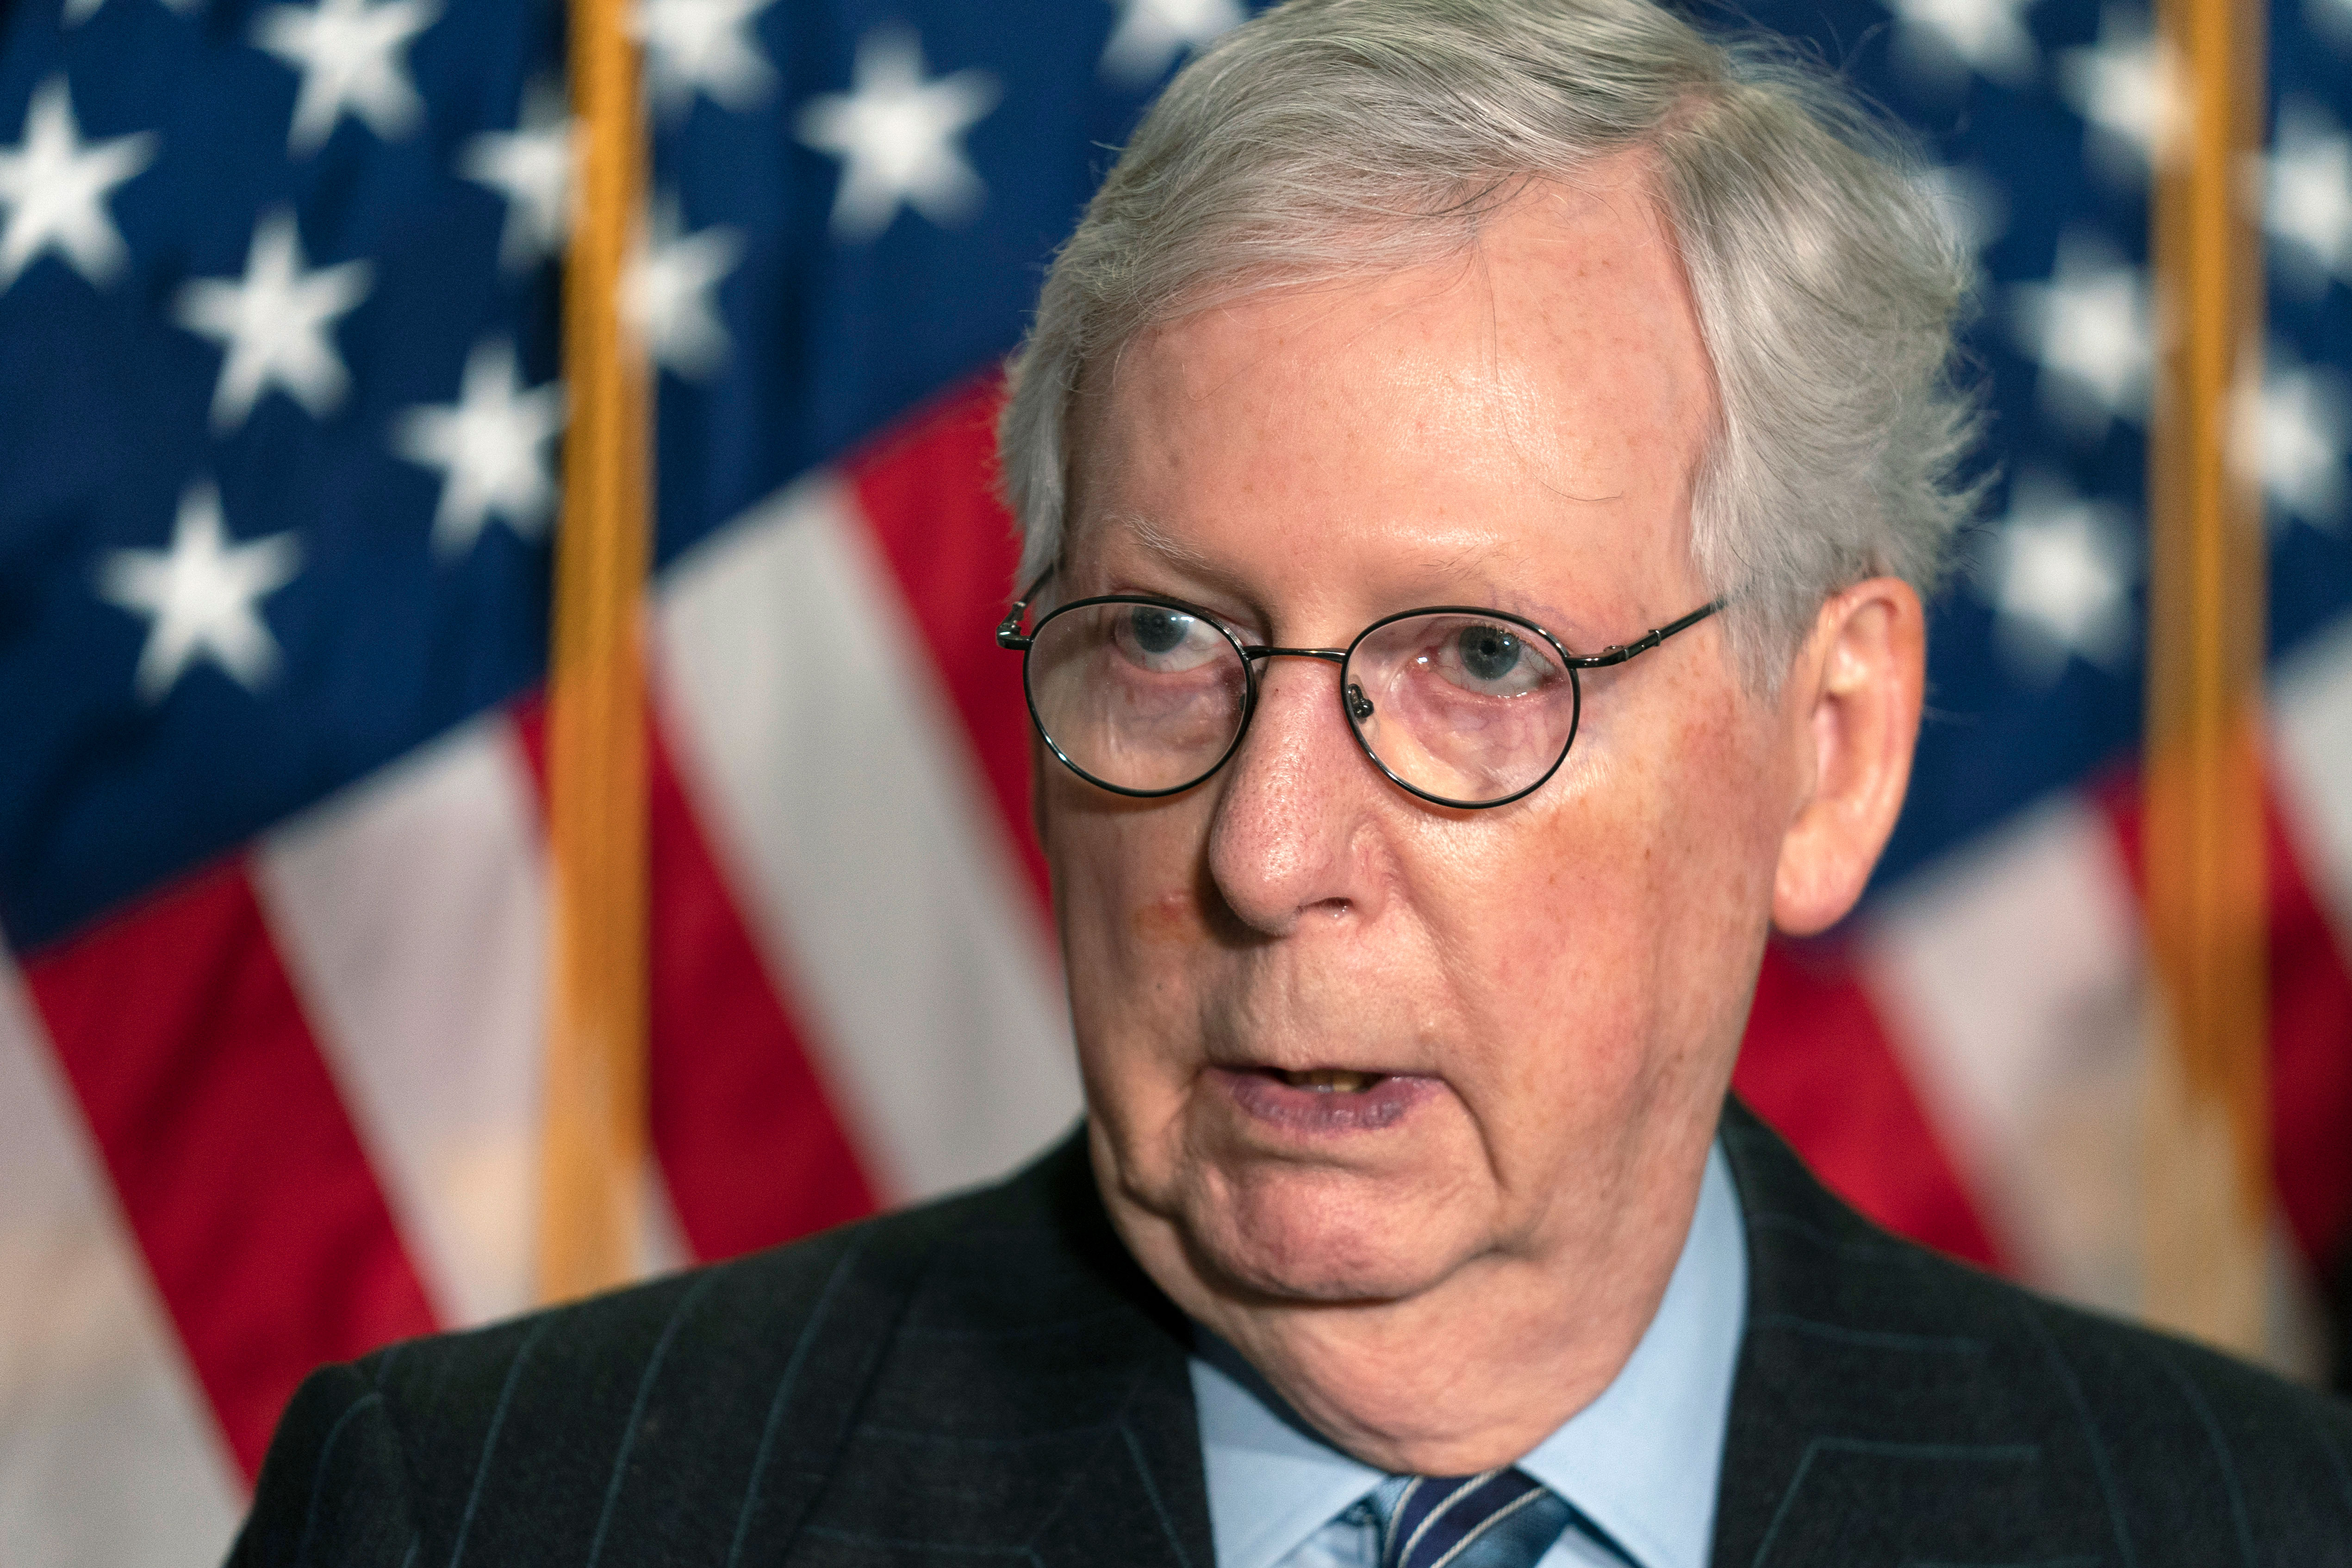 Senate Minority Leader Mitch McConnell speaks to reporters at the Capitol on February 2.